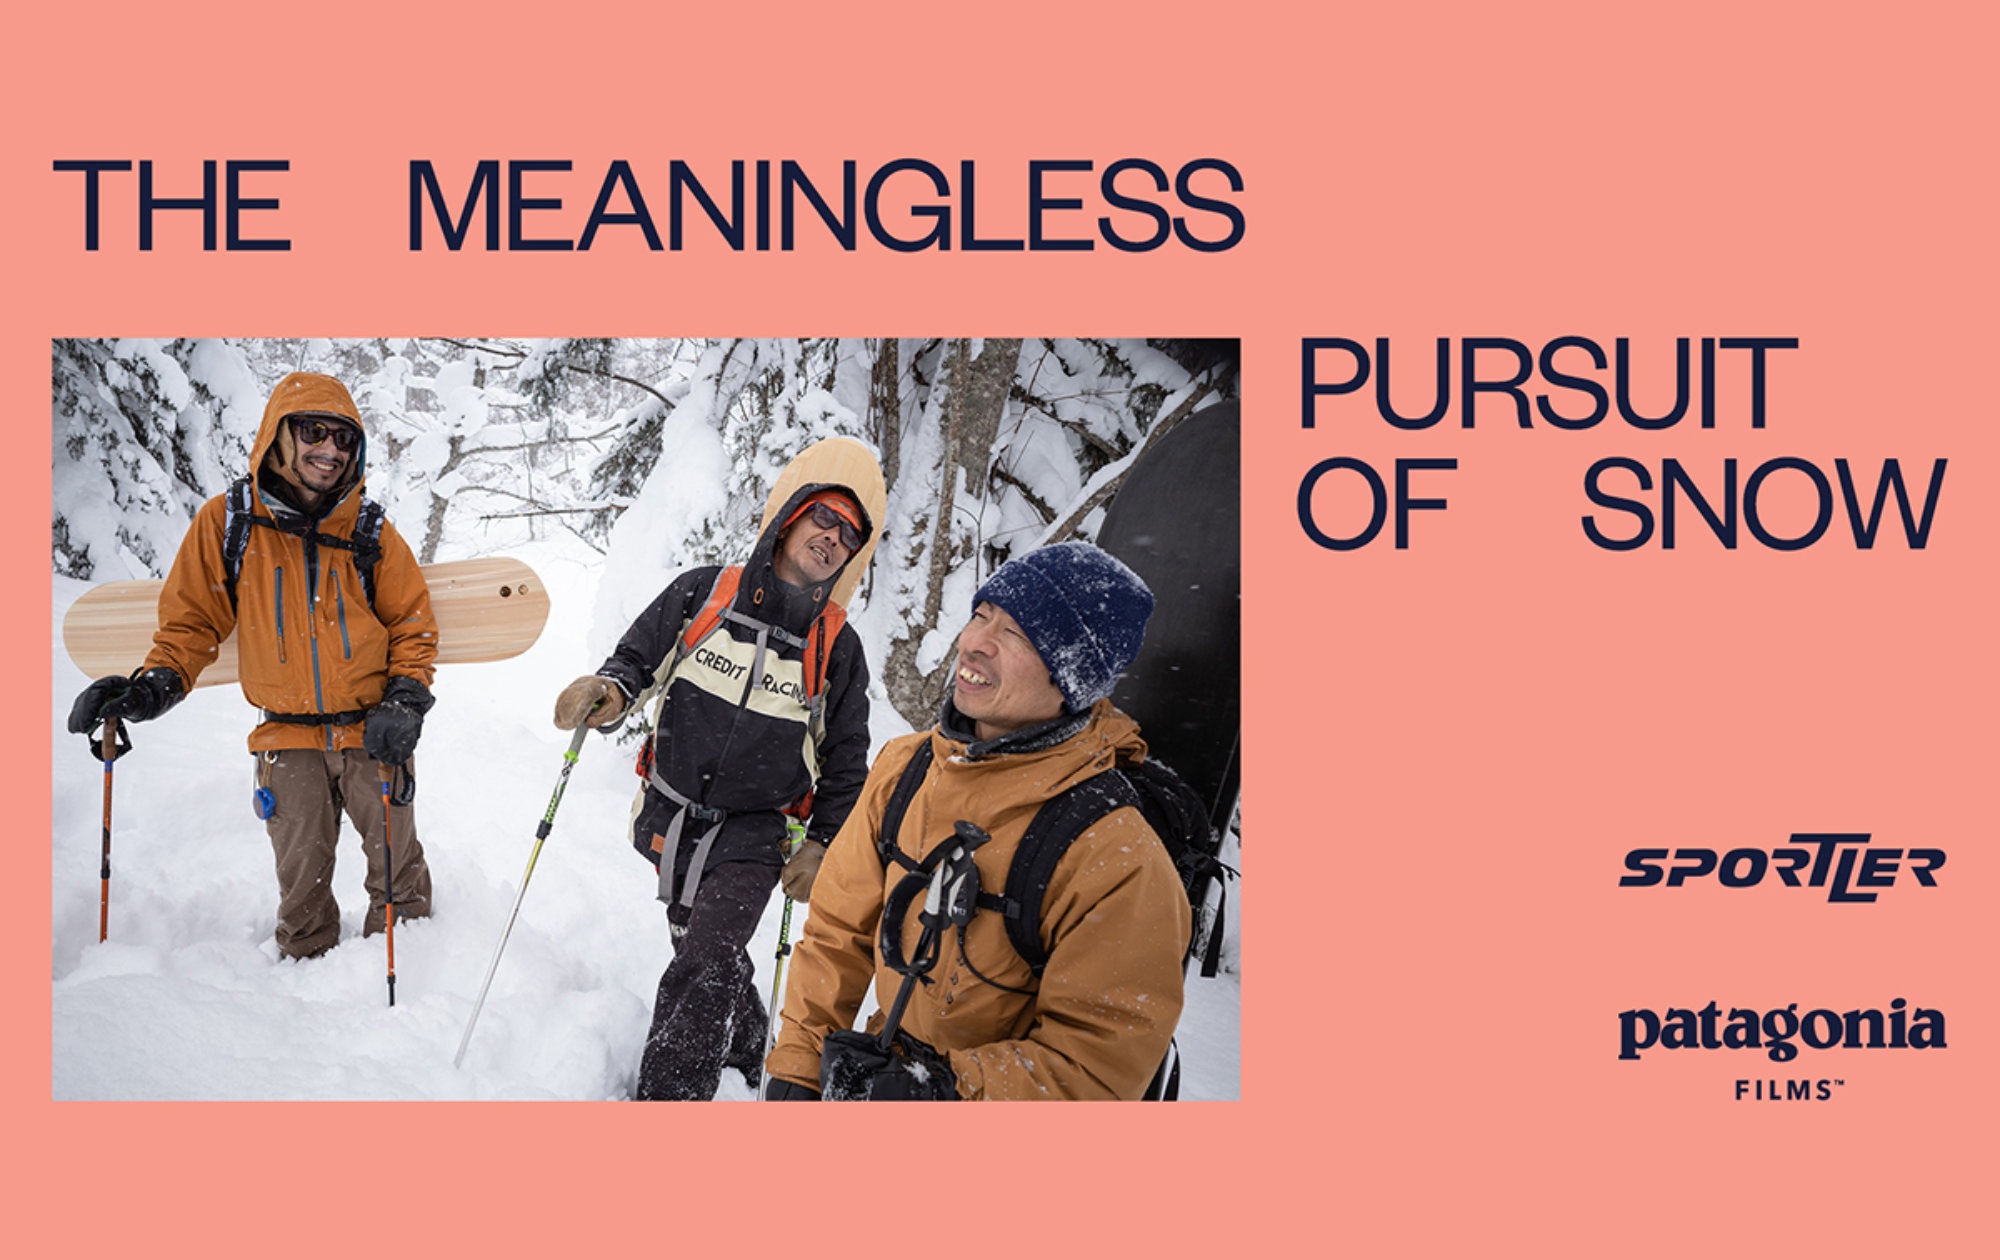 Serata film con Patagonia The Meaningless pursuit of snow